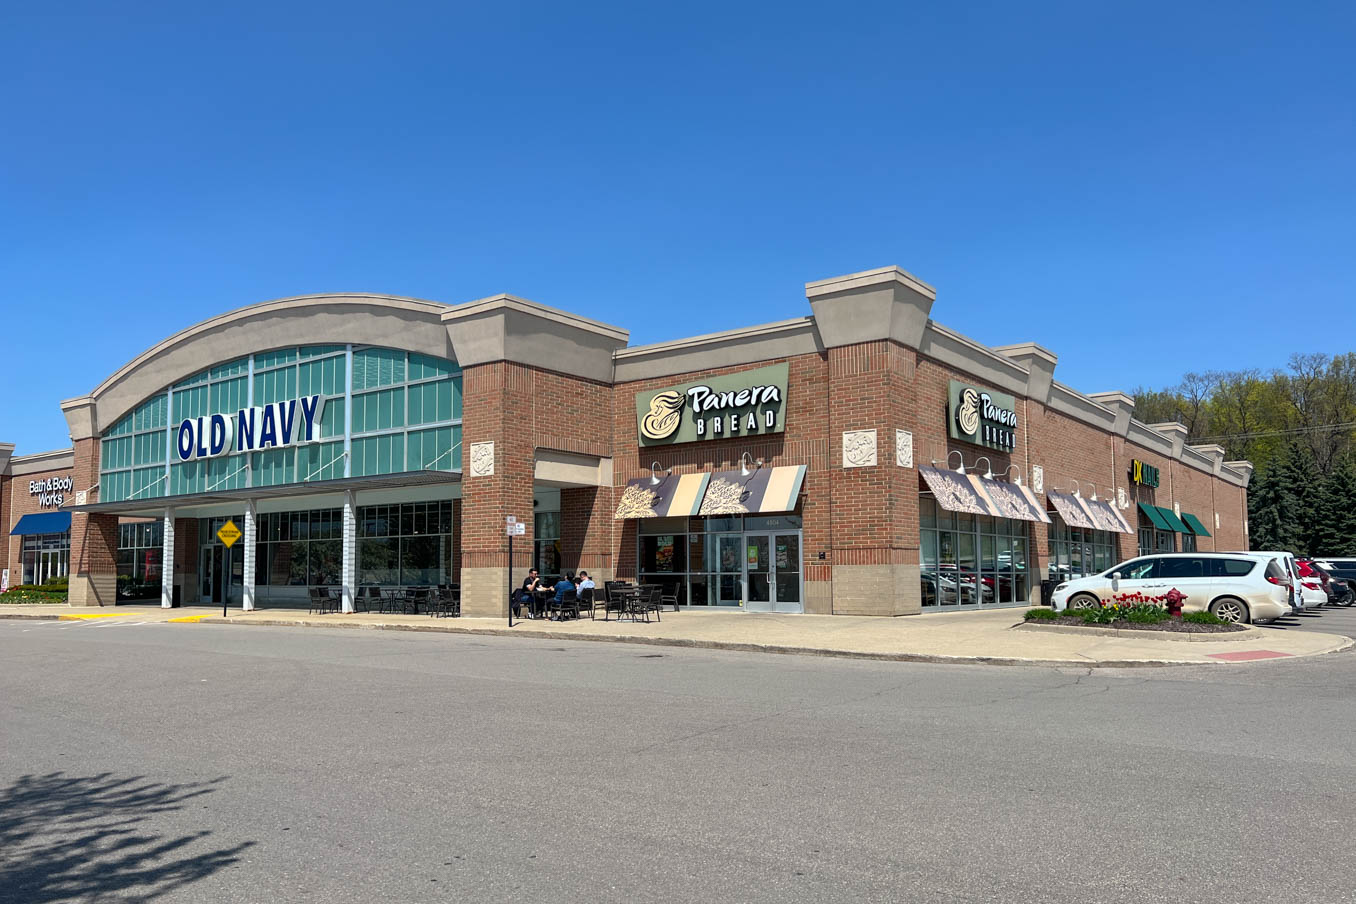 Old Navy and Panera Bread storefronts